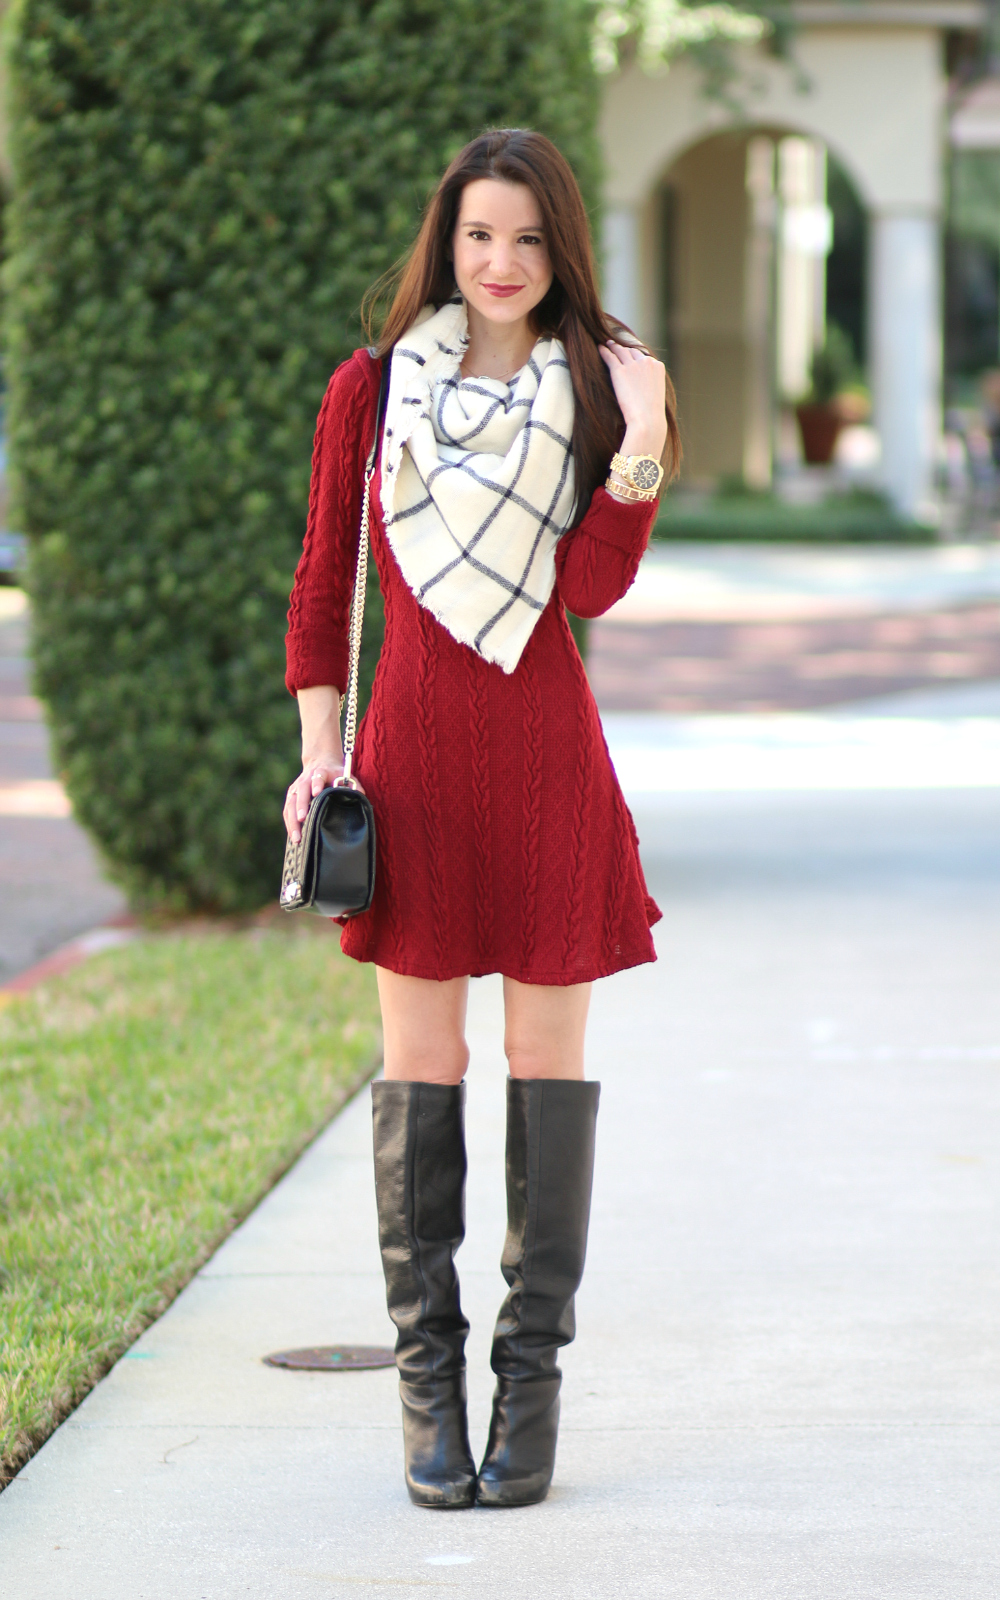 The Pink Lily Boutique, Burgundy Sweater Dress, Sweater Dress, Fall Fashion, Leave You Breathless Dress, Stephanie Ziajka, Diary of a Debutante